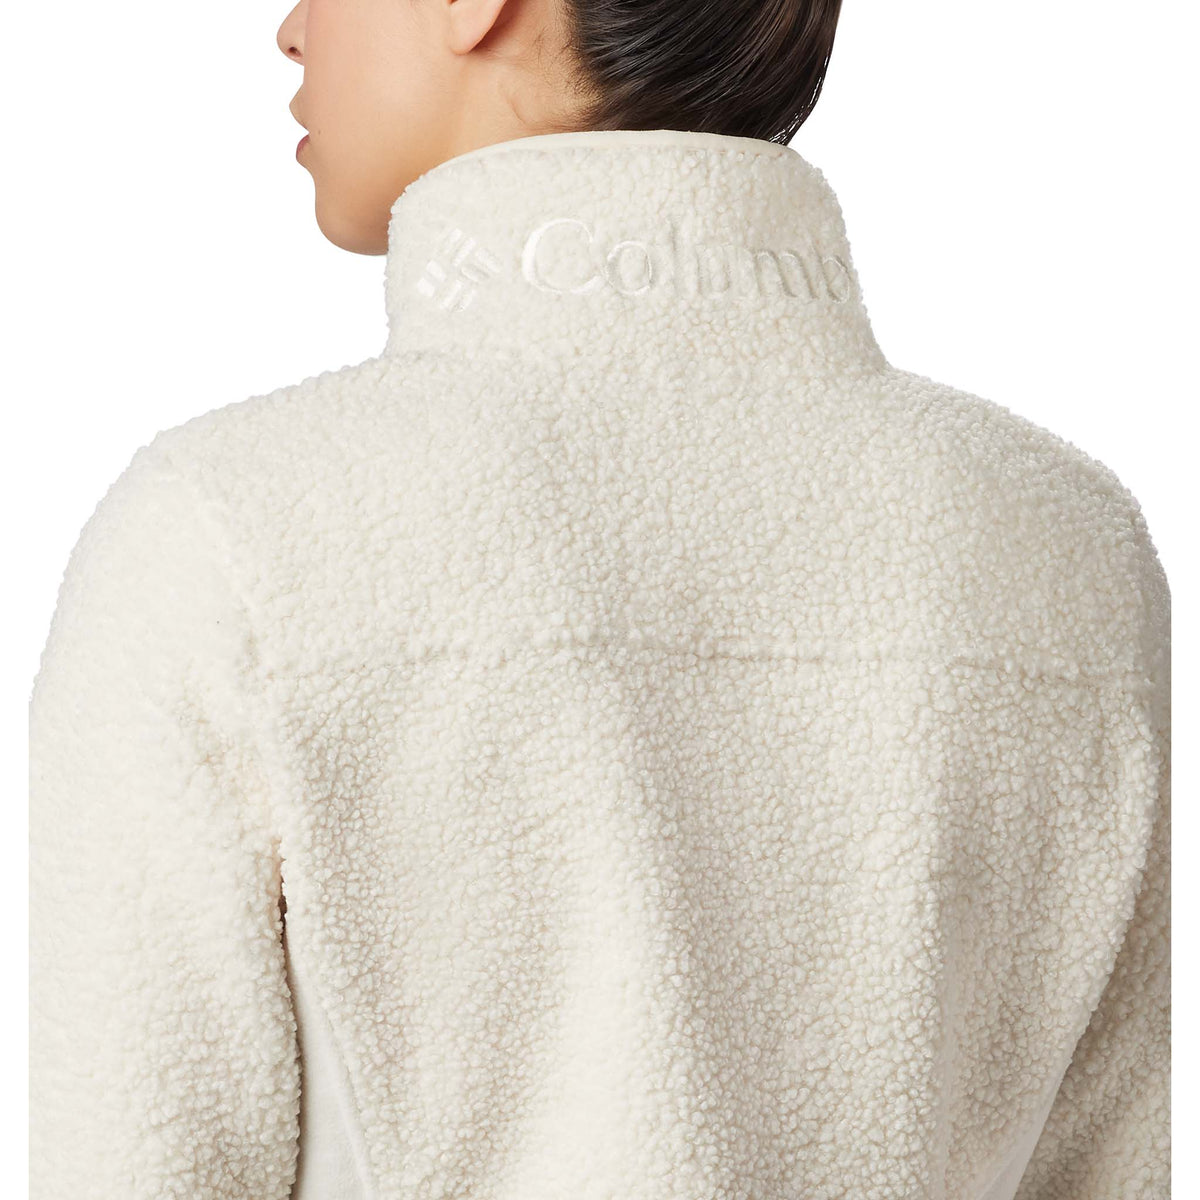 Columbia Panorama Full-Zip chandail laine polaire blanc pour femme dos